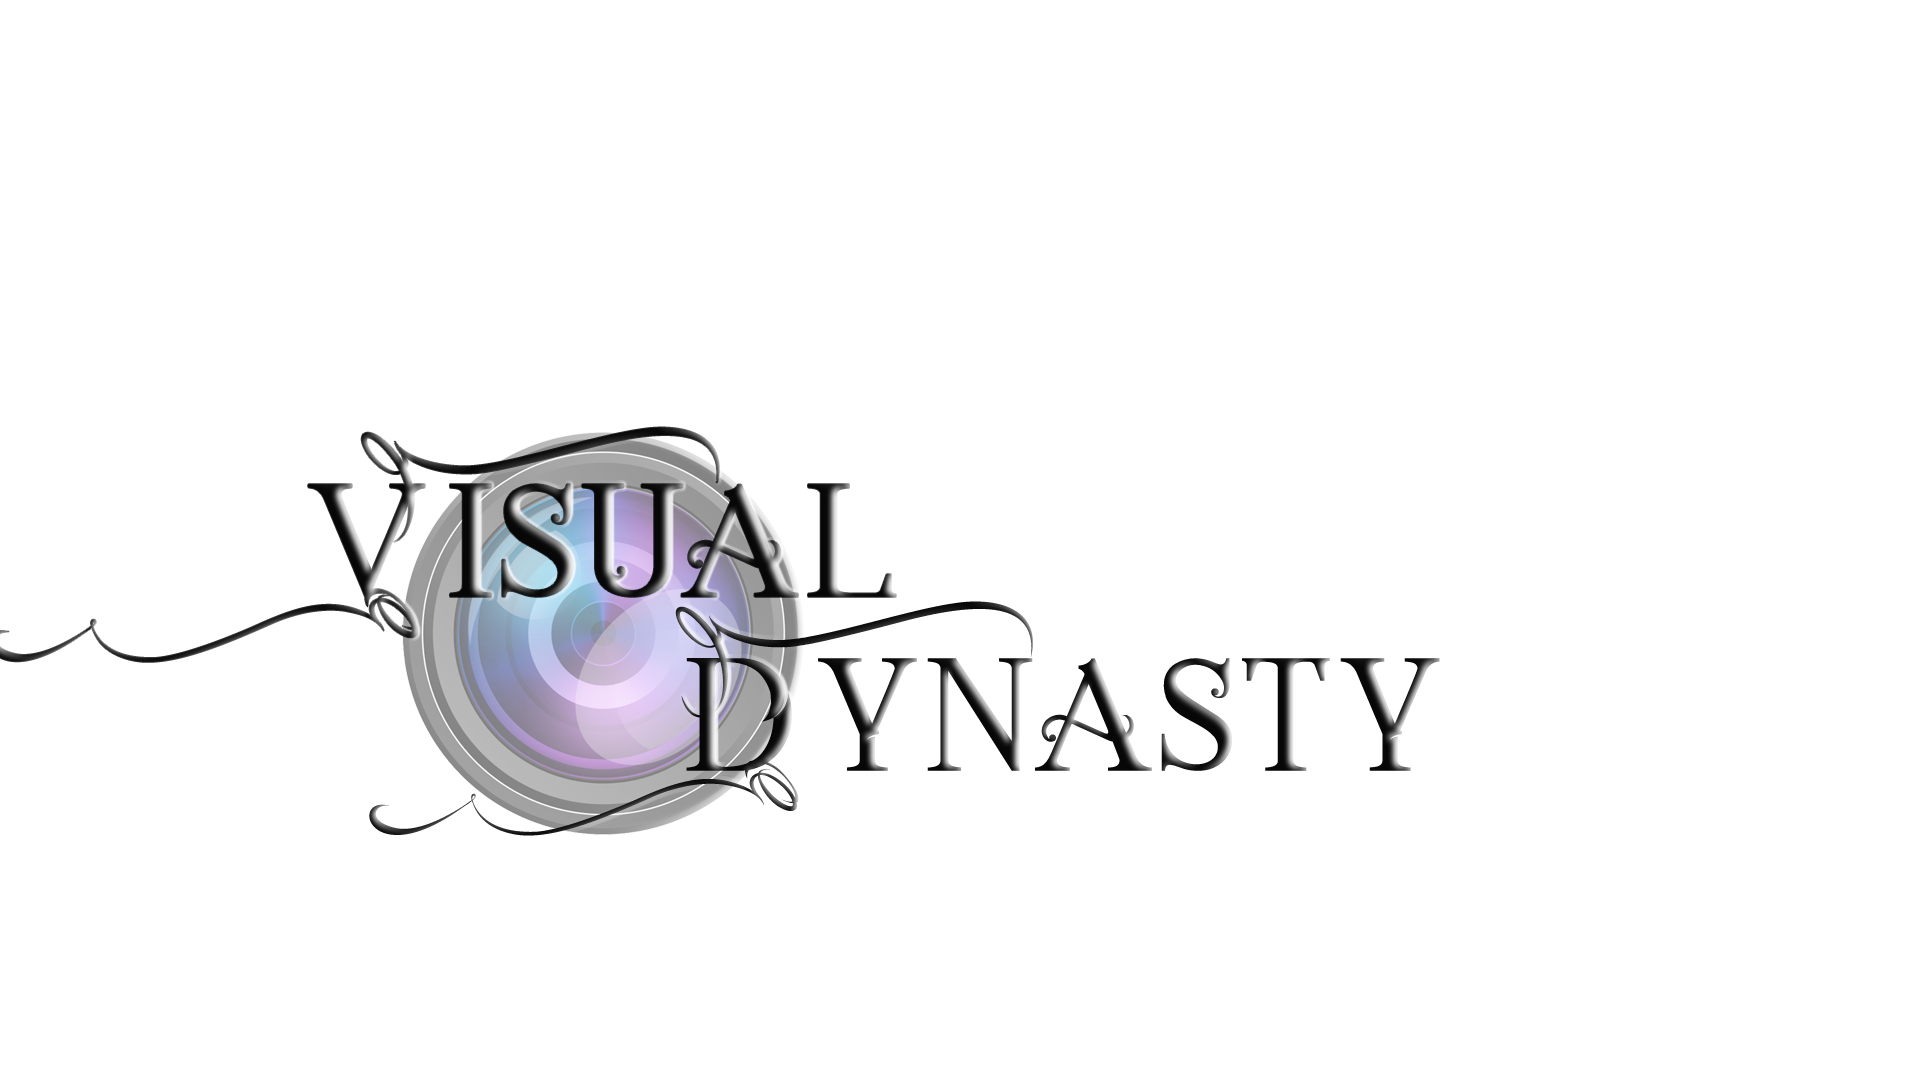 Visual Dynasty Productions